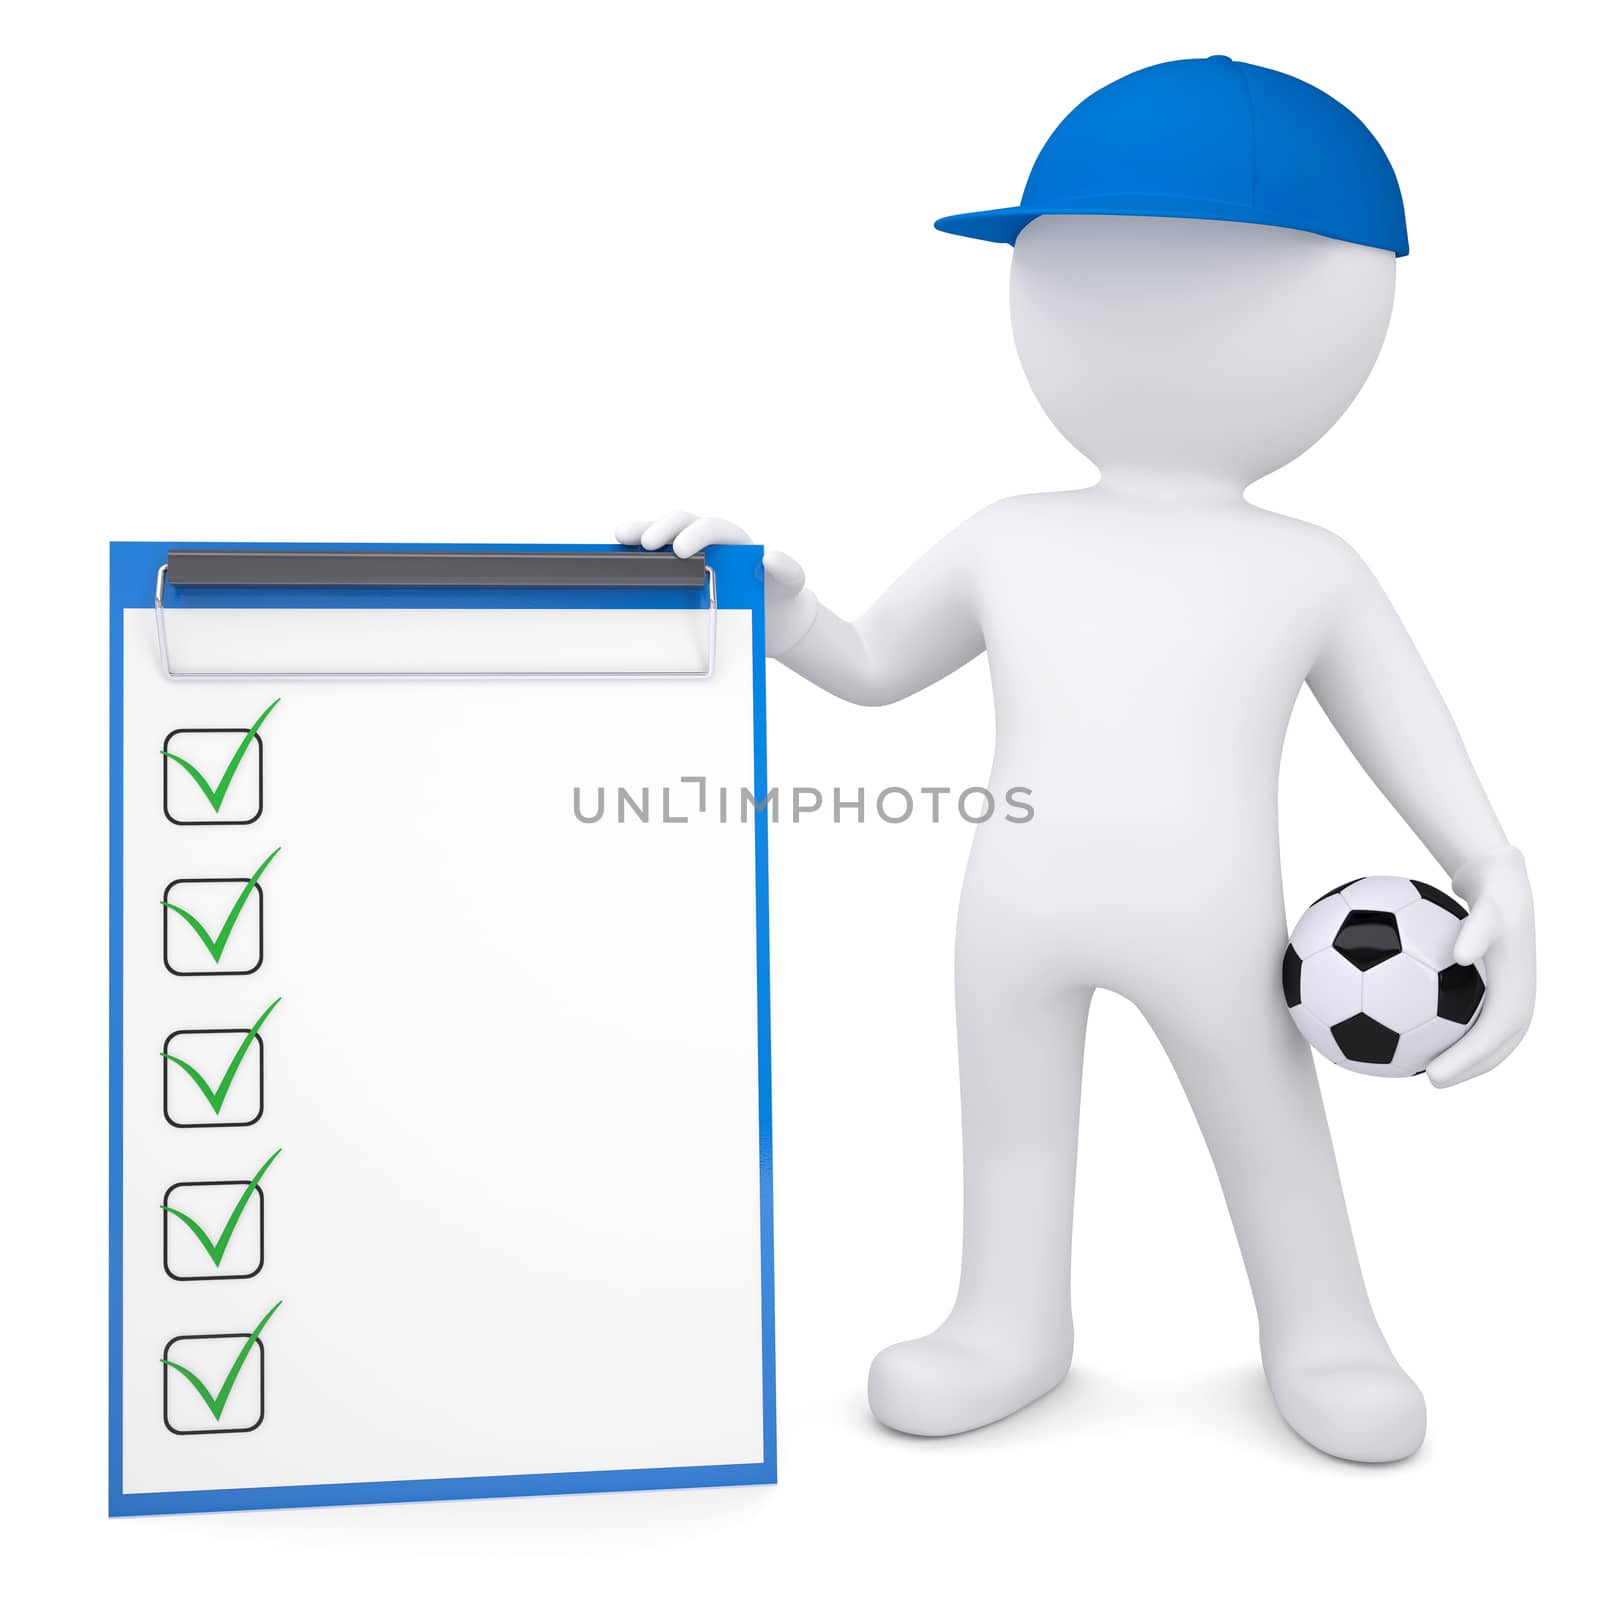 3d white man with soccer ball and checklist. Isolated render on a white background